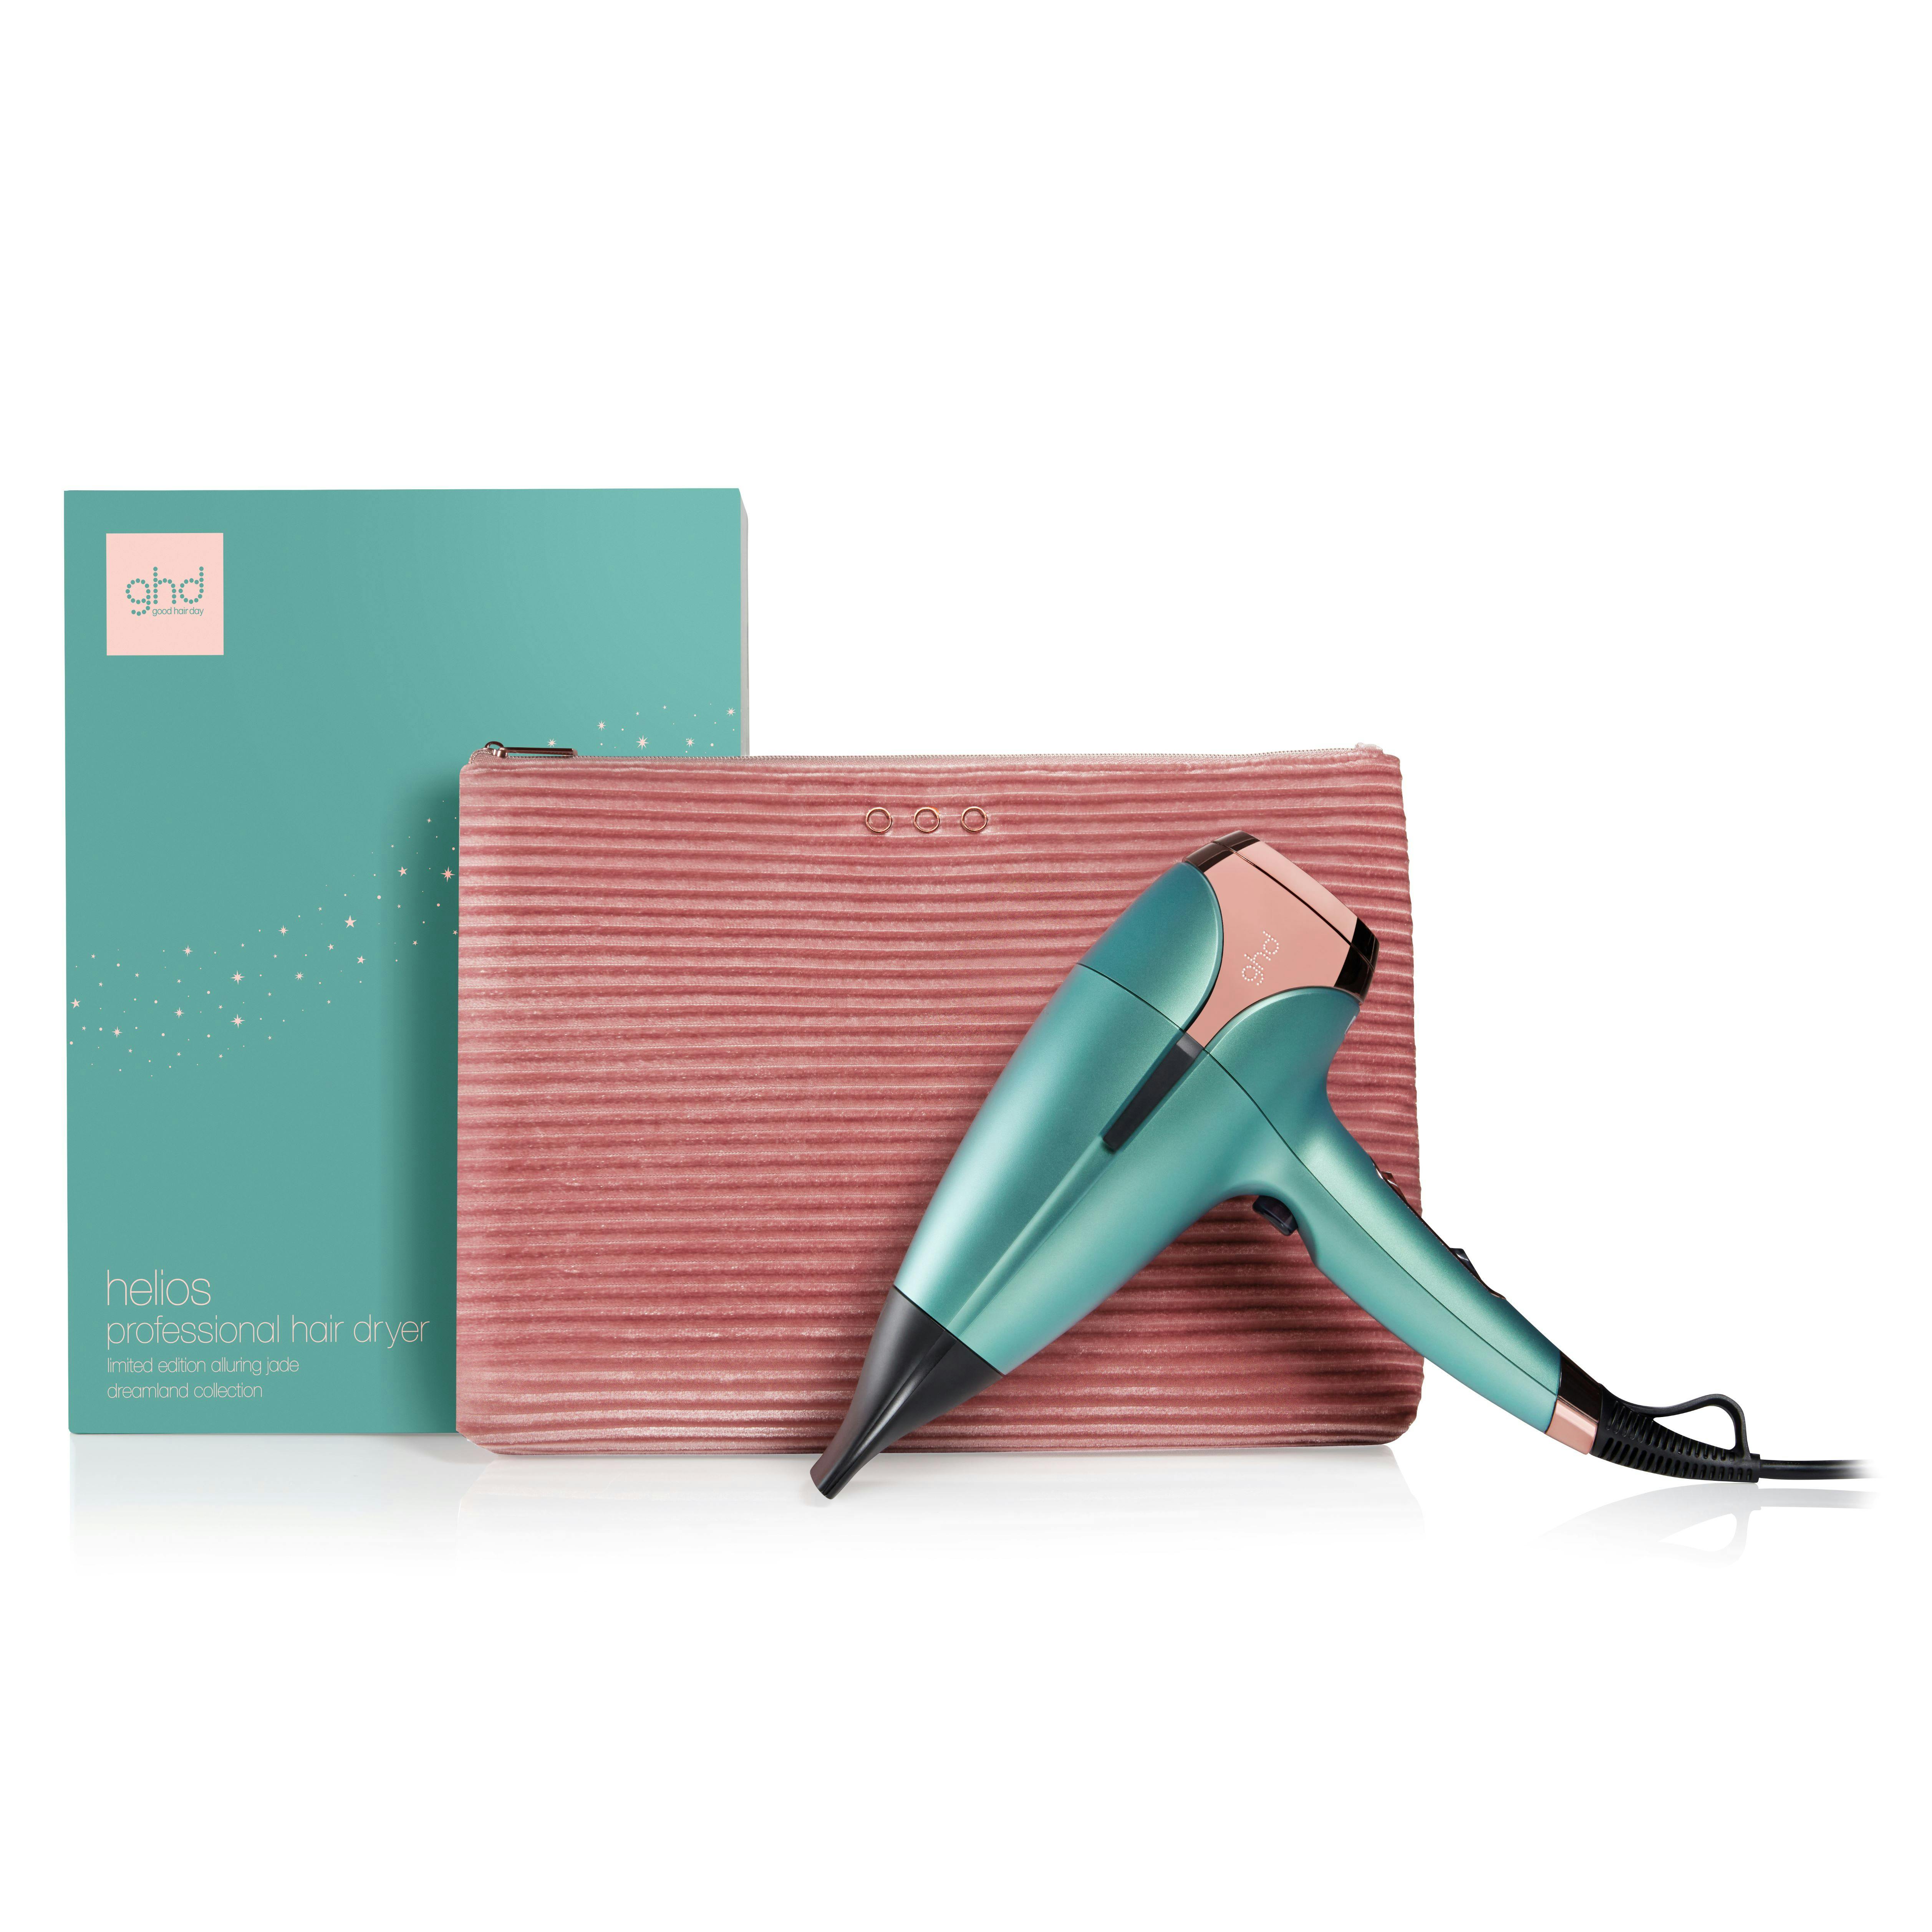 GHD Helios Limited Edition Gift Set 1 st